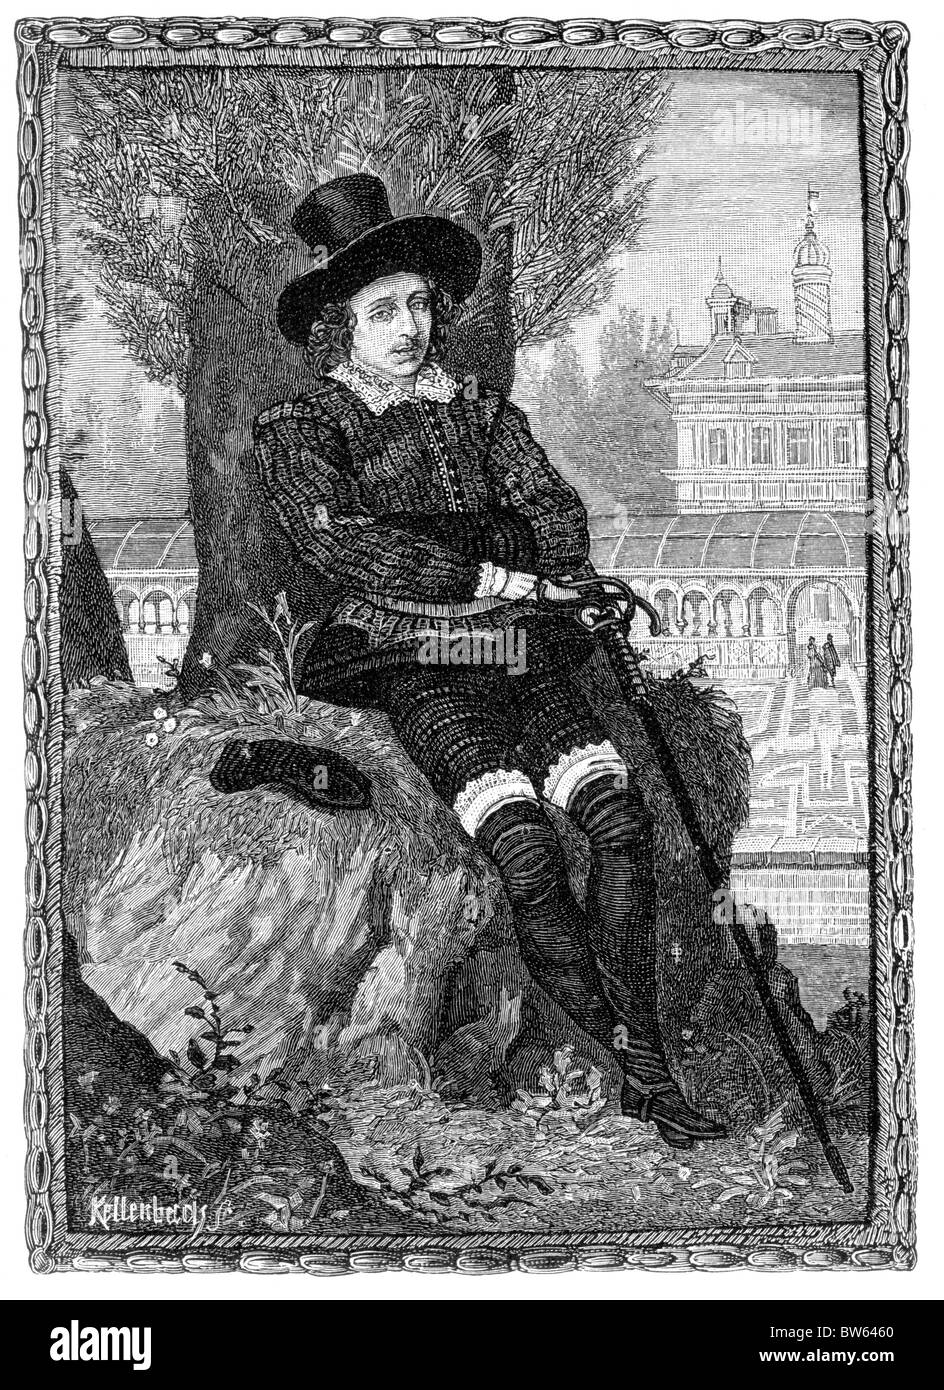 Sir Philip Sidney 16th century poet, courtier and soldier; Black and White Illustration by Isaac Oliver Stock Photo